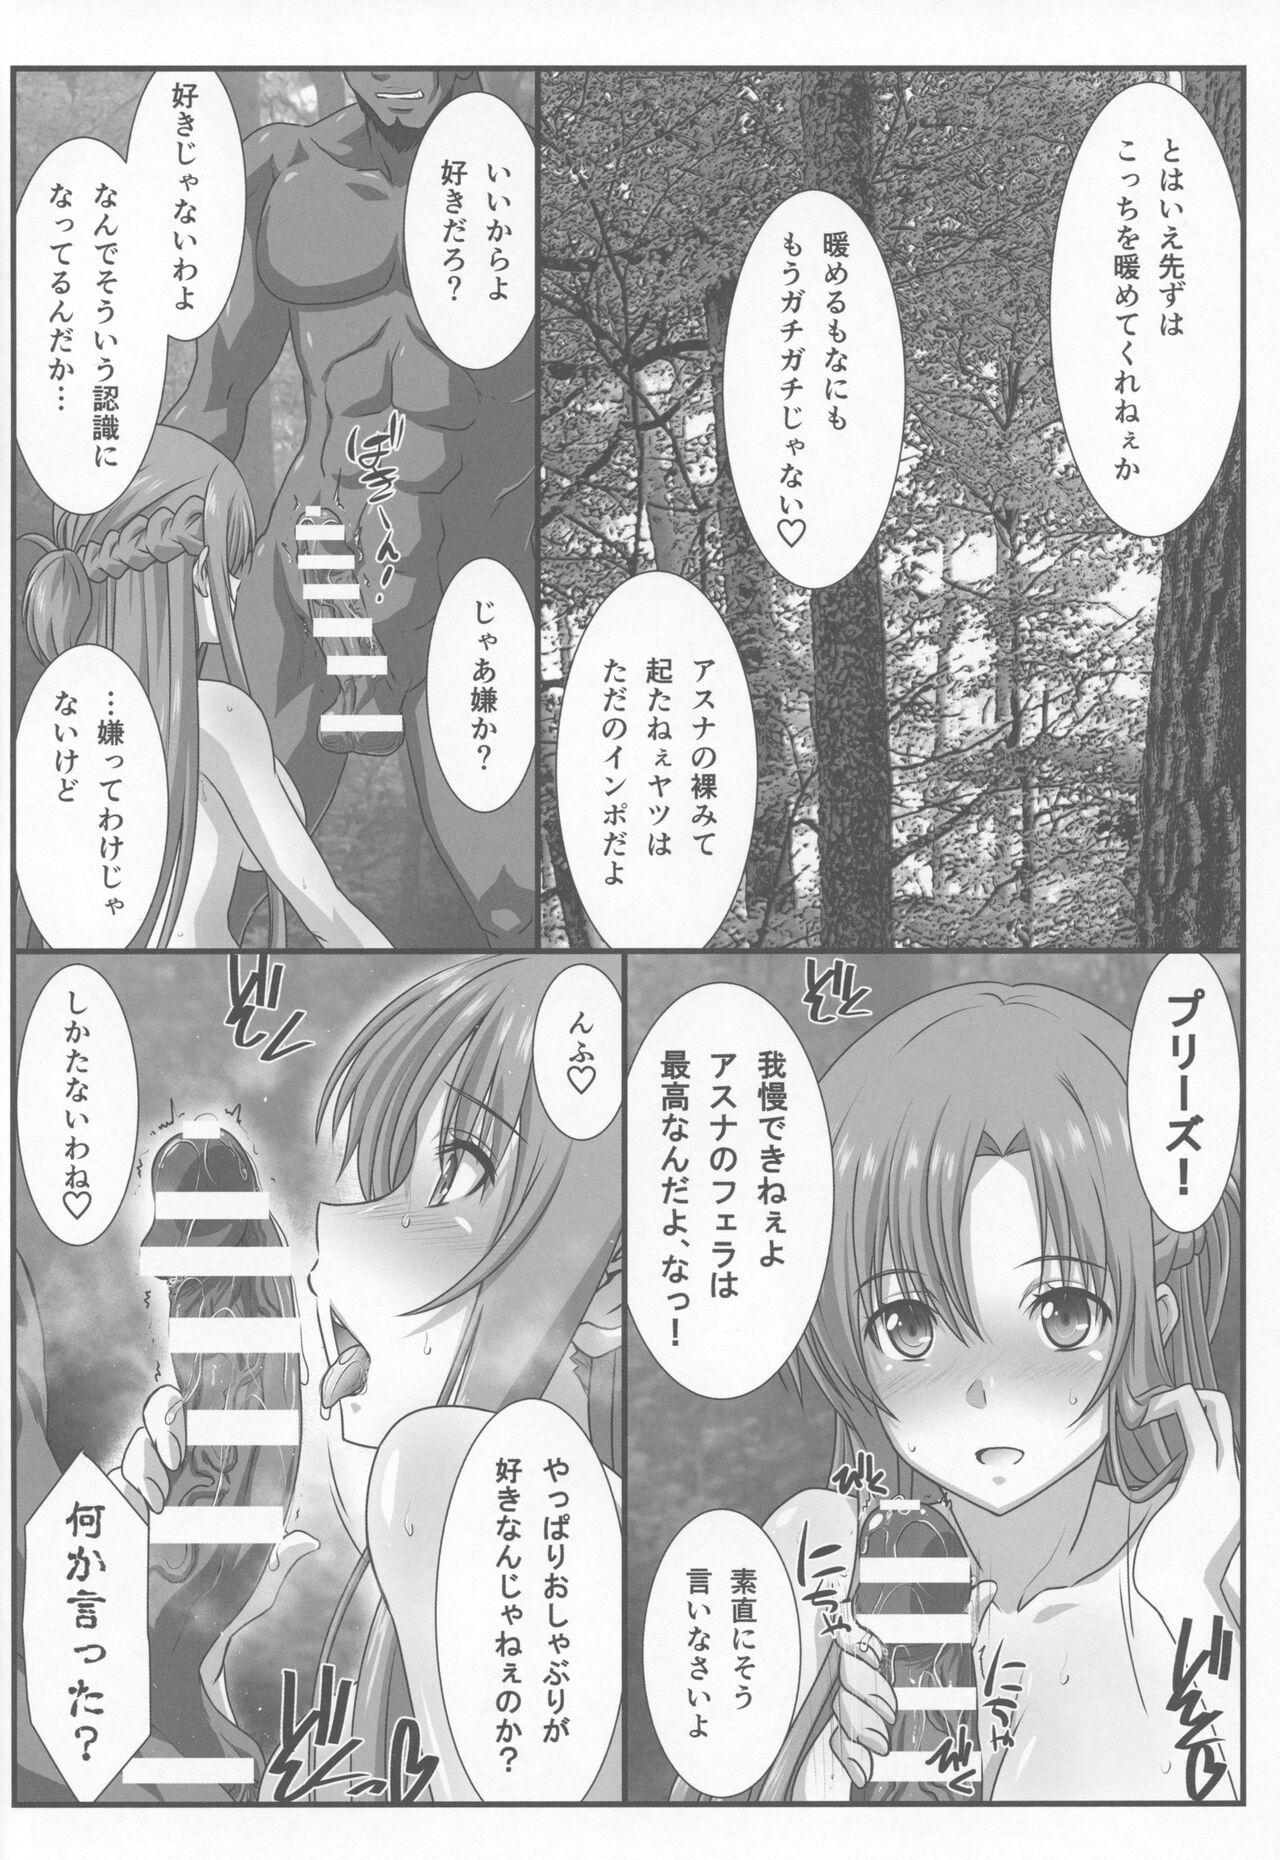 Vadia Astral Bout Ver. 45 - Sword art online Fetiche - Page 5